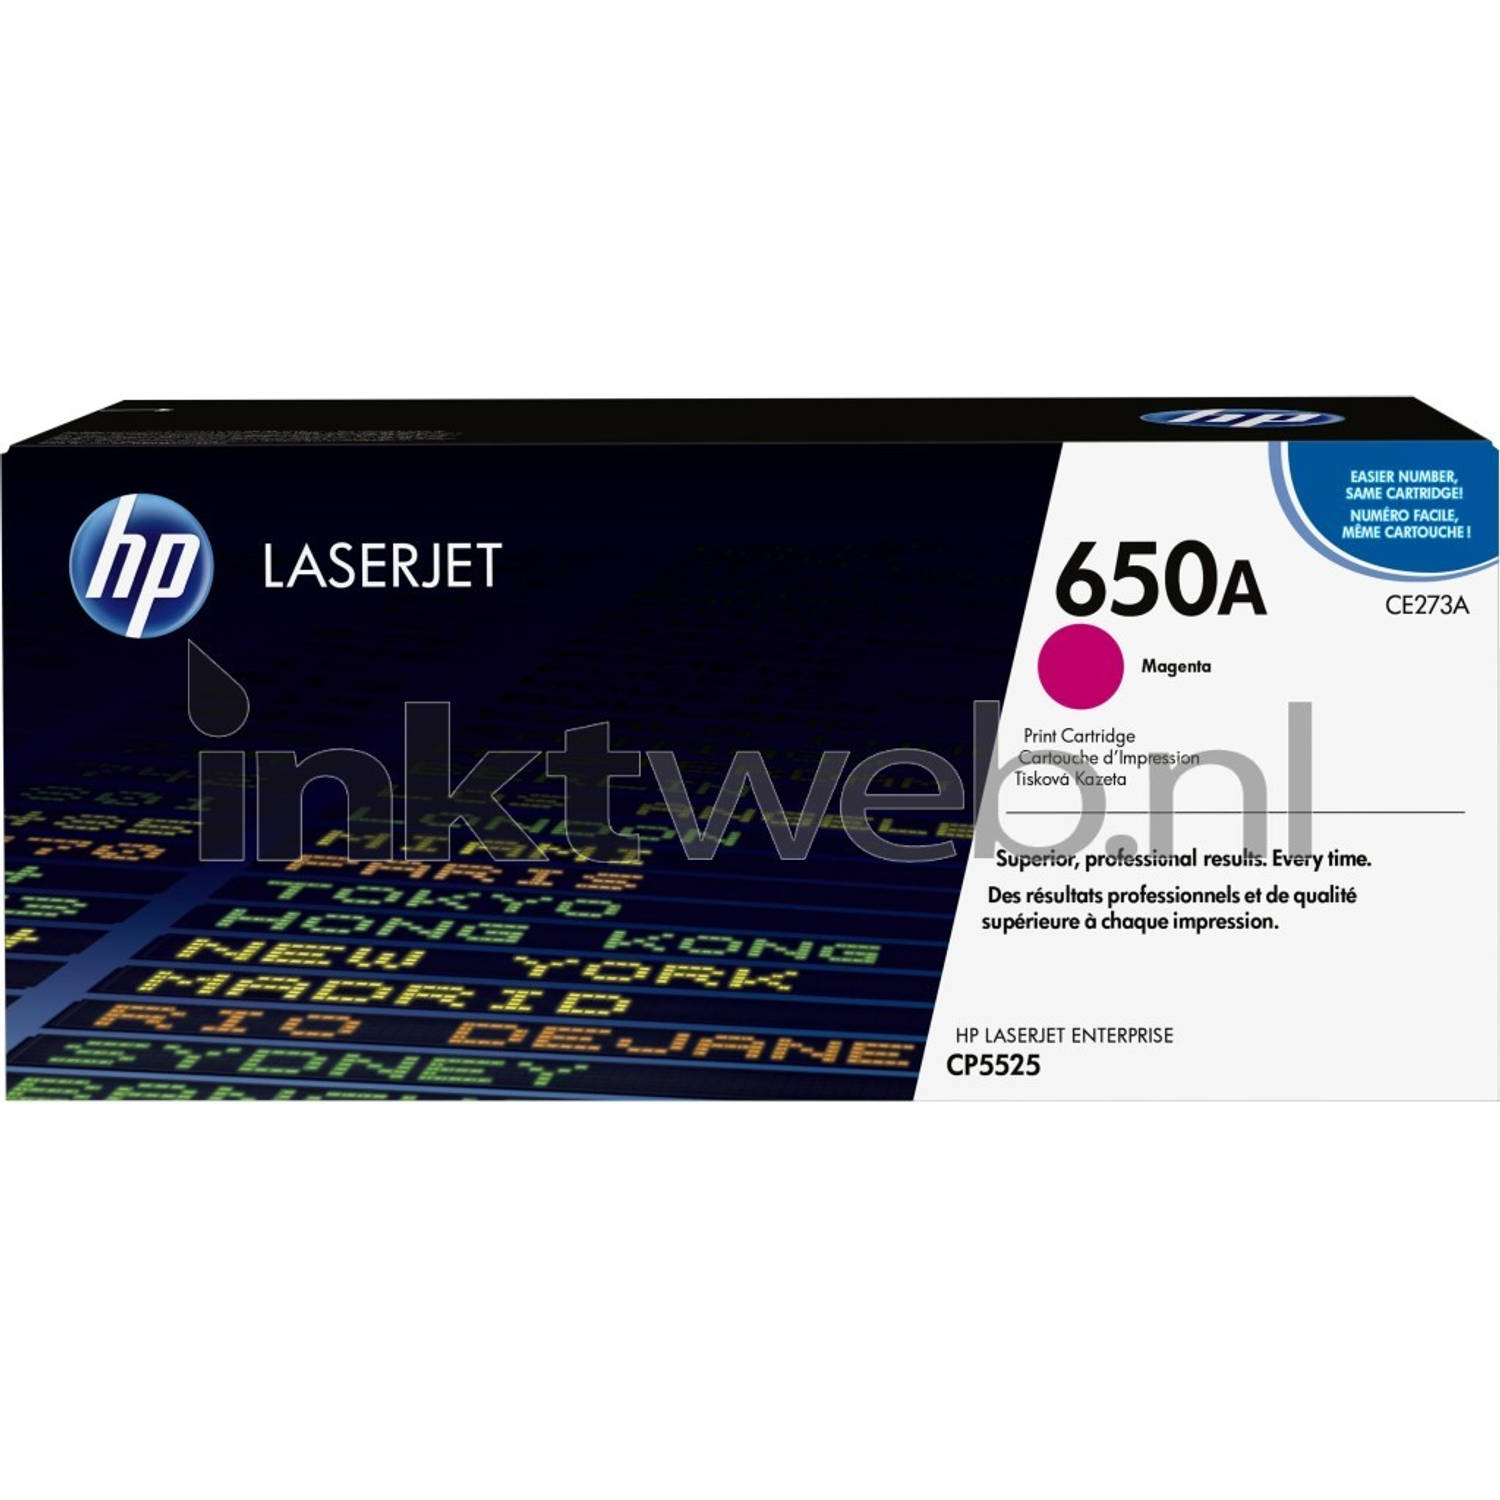 HP Color LaserJet CP5520 printing supplies 650A (CE273A)